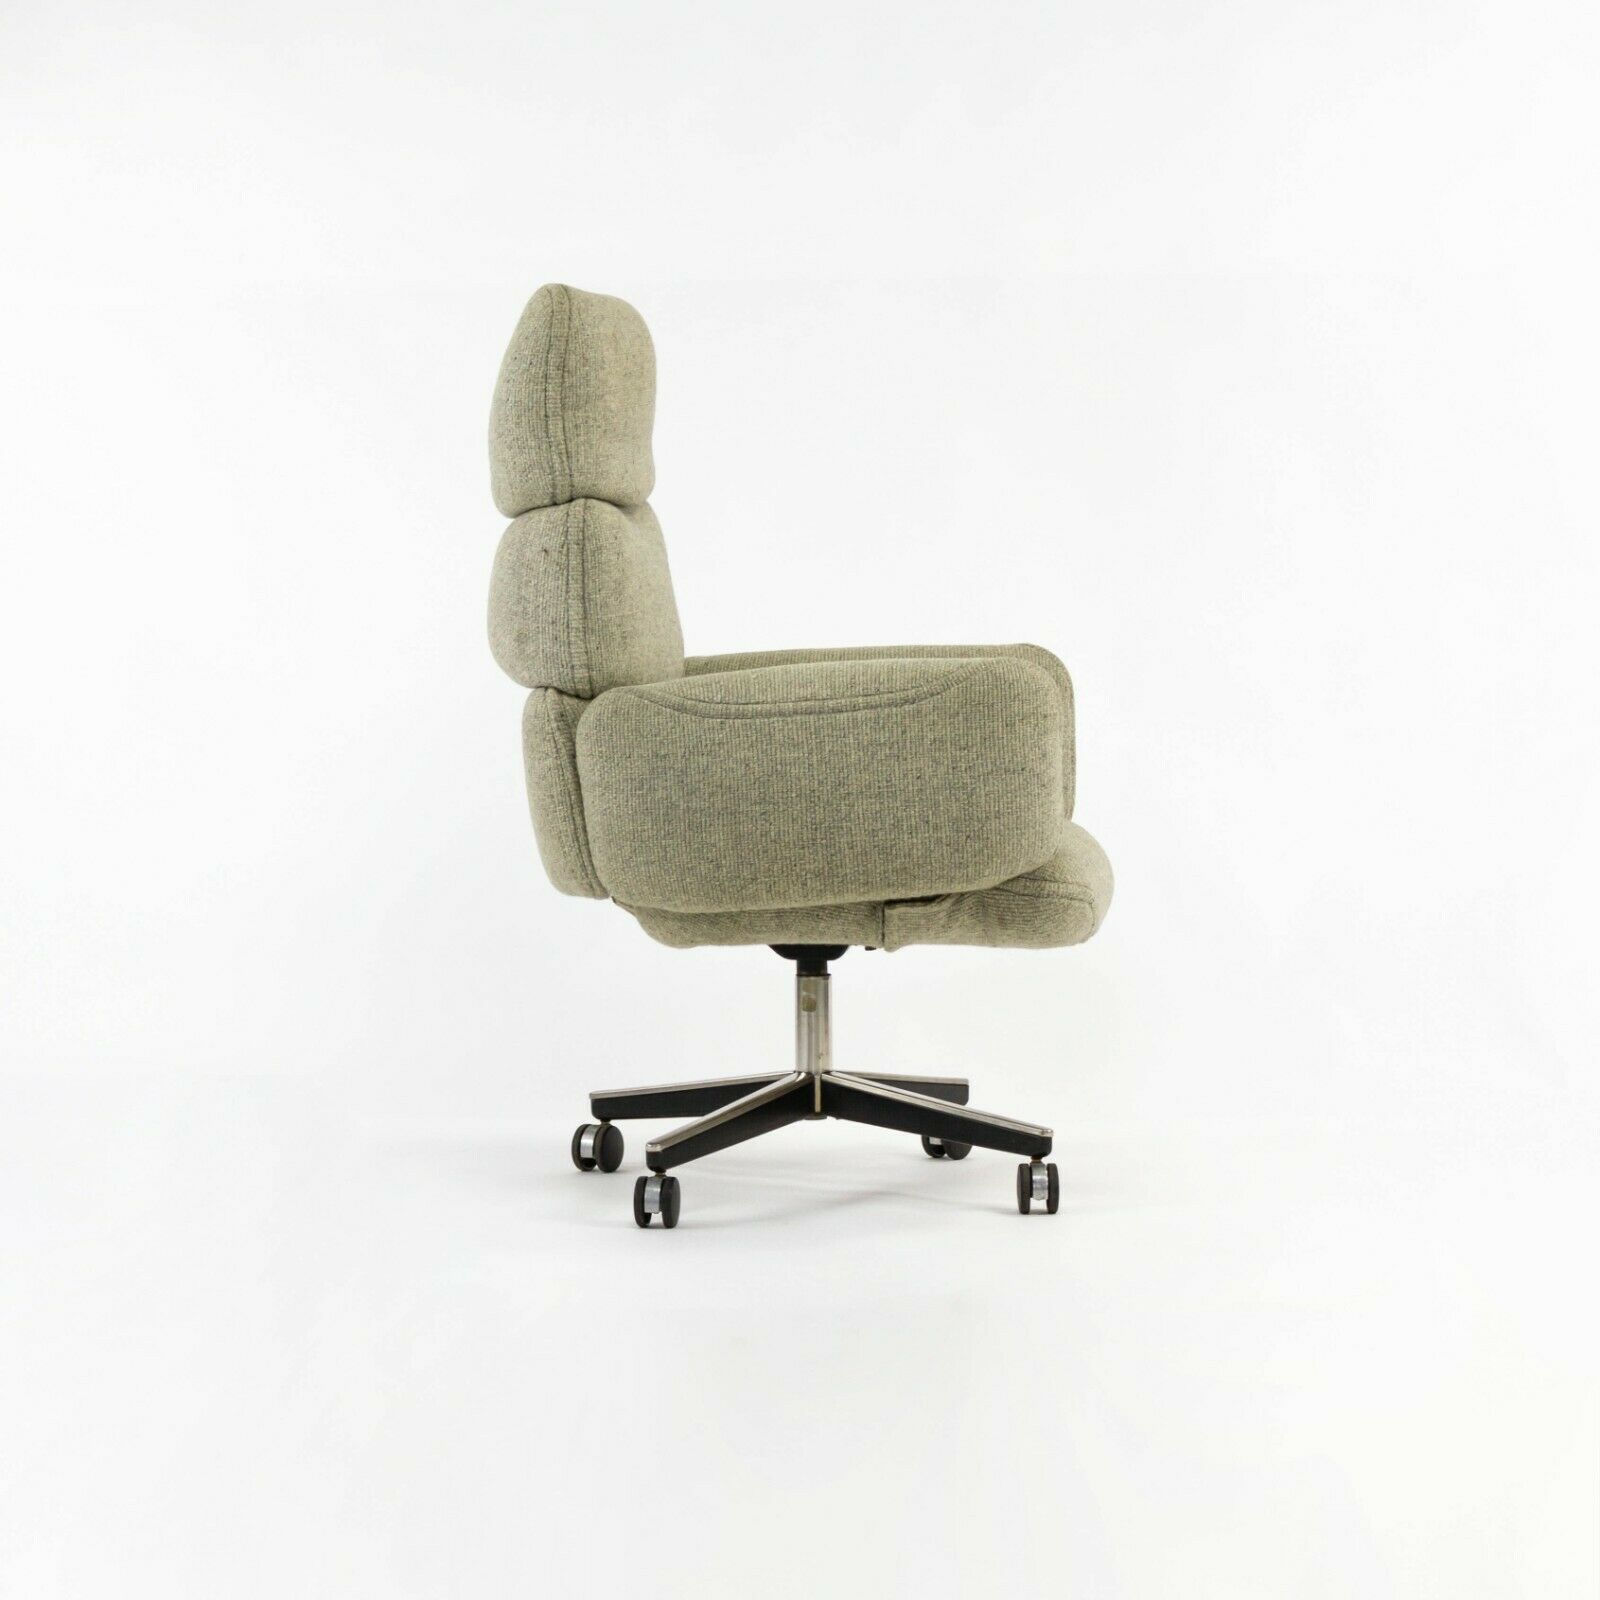 1980's Otto Zapf for Knoll High Back Office Desk Chair with Oatmeal Fabric Upholstery